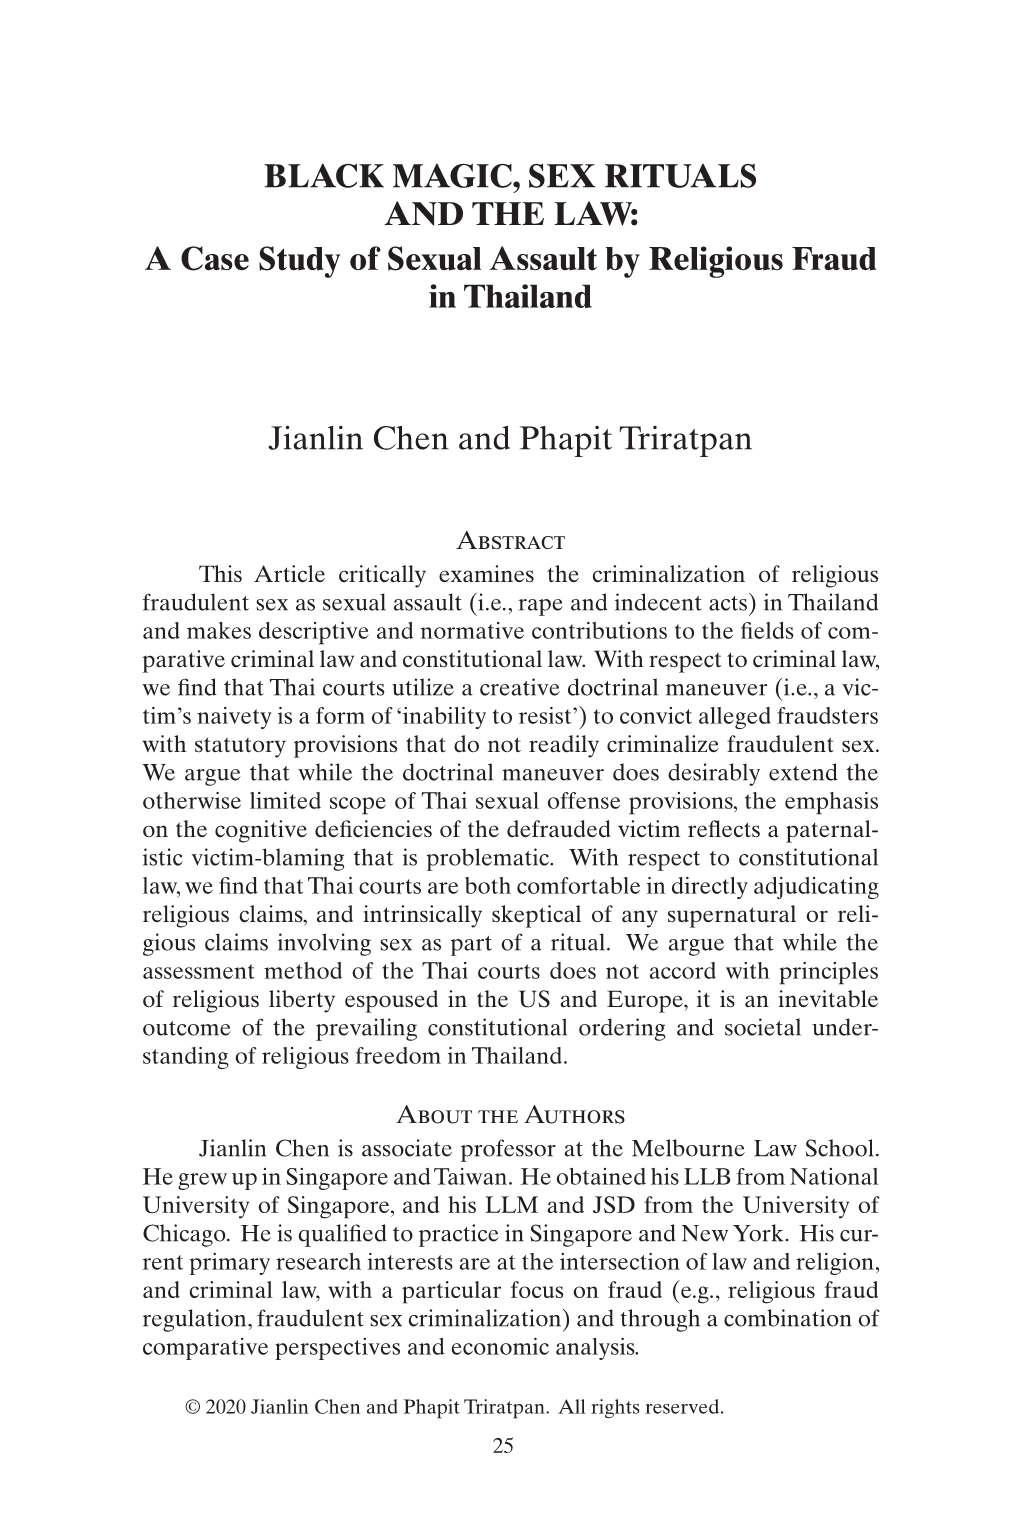 BLACK MAGIC, SEX RITUALS and the LAW: a Case Study of Sexual Assault by Religious Fraud in Thailand